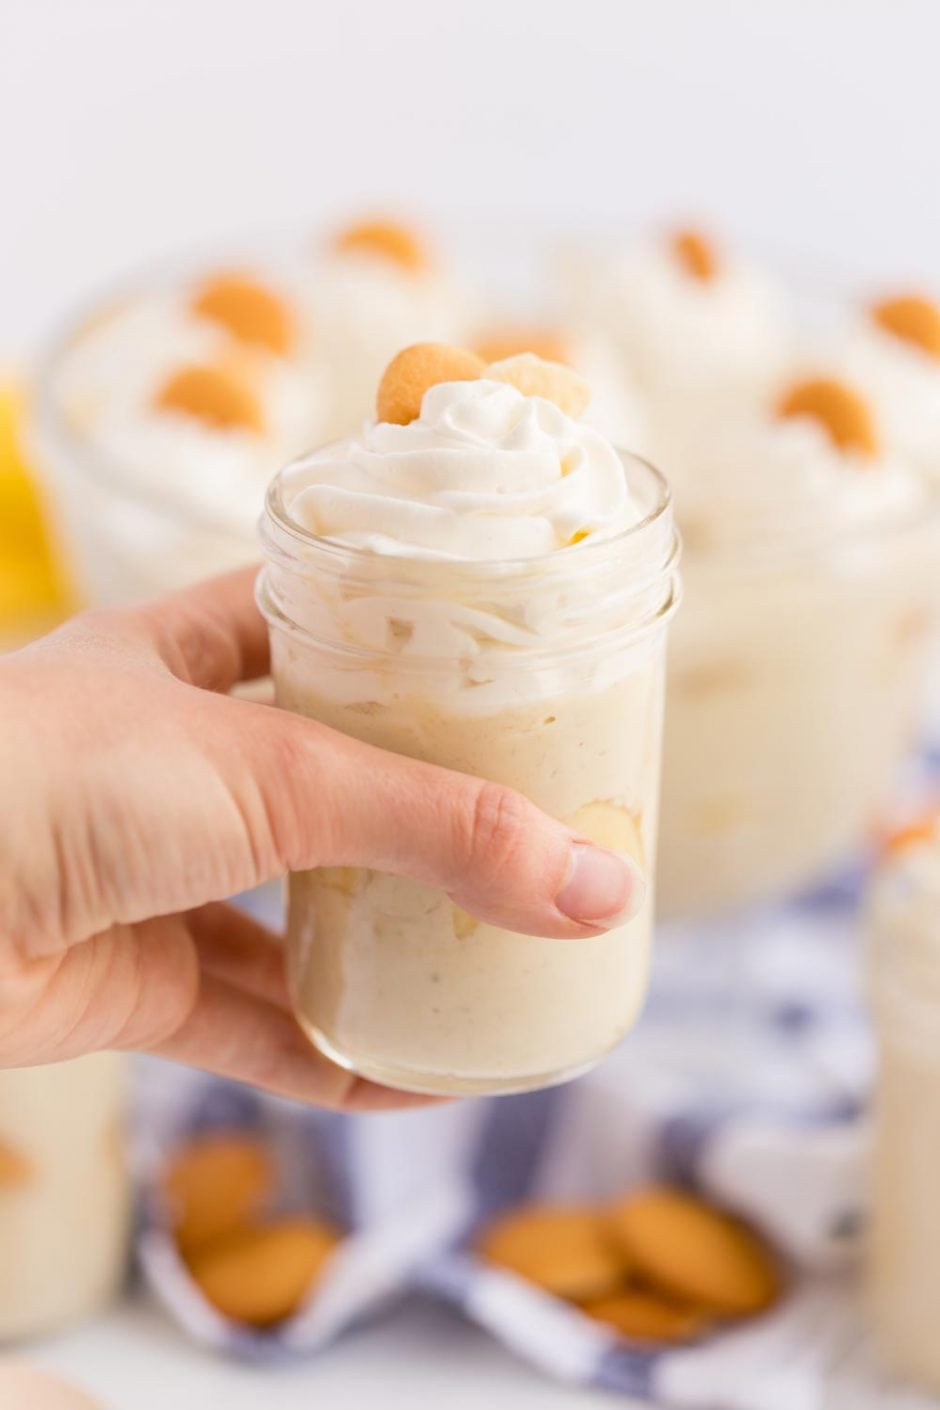 Banna pudding scooped into a mason jar topped with whipped cream, a slice of banana and a vanilla wafer.